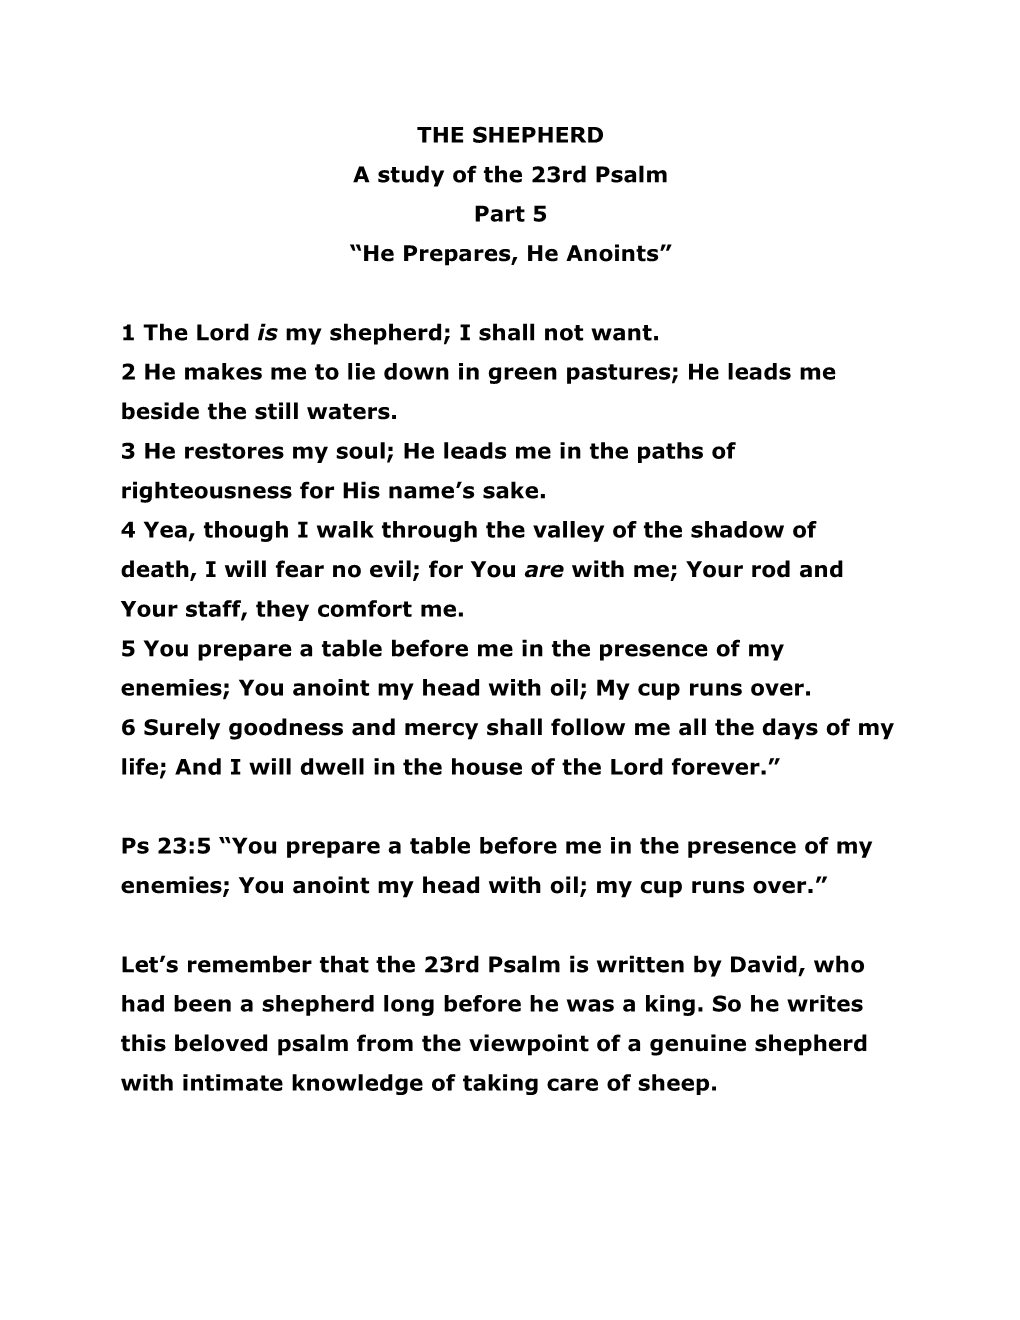 “He Prepares, He Anoints” 1 the Lord Is My Shepherd